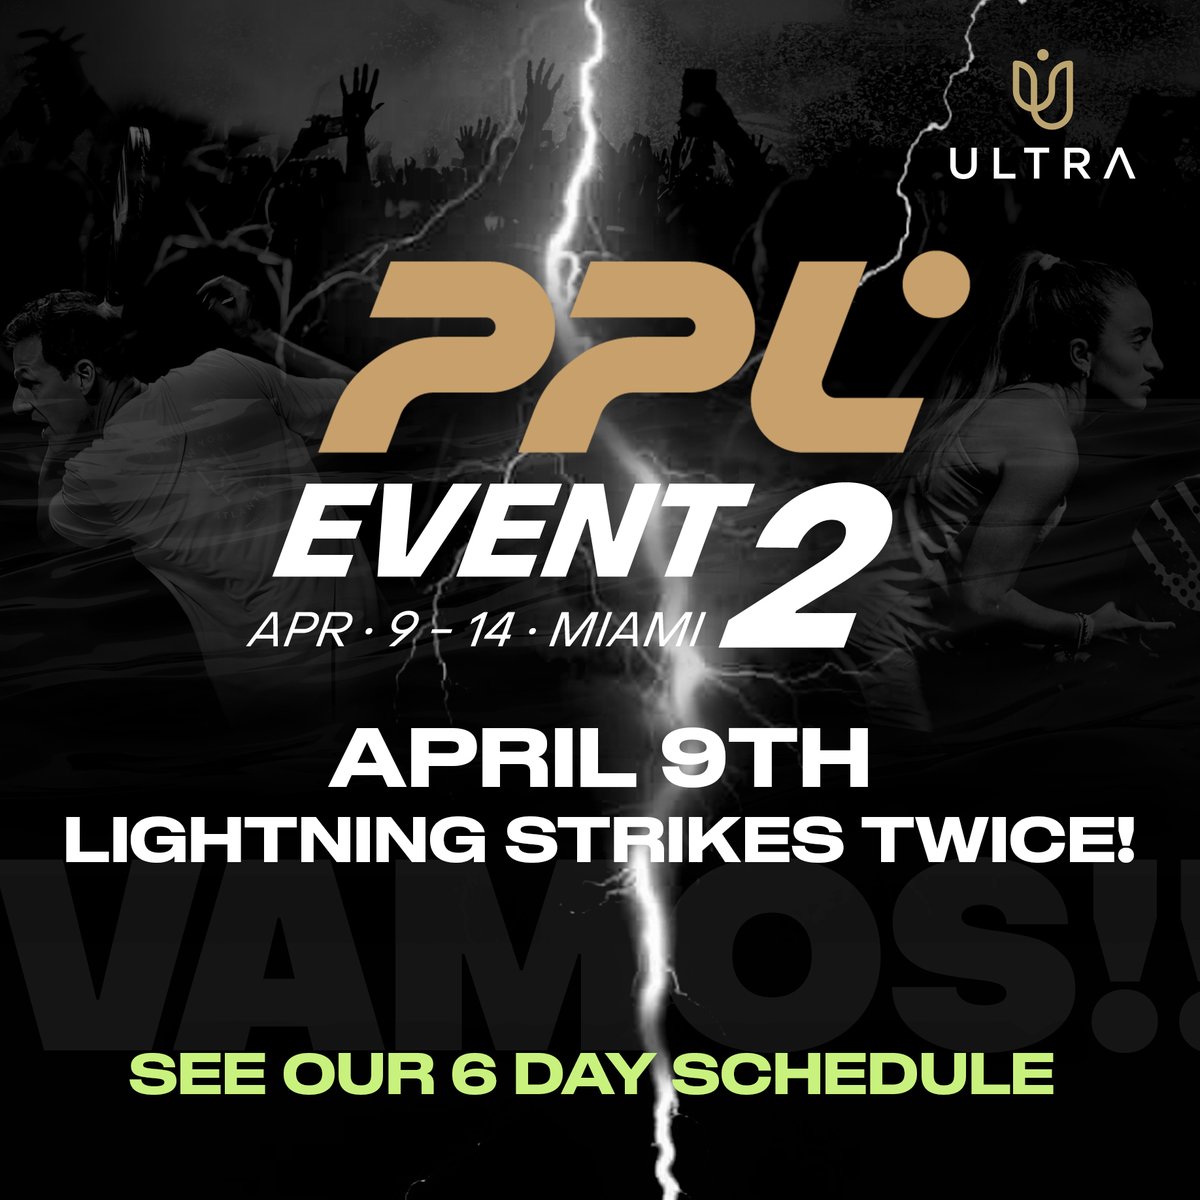 On April 9th lightning strikes twice! Join us for PPL Event 2 in Miami at Ultra Club! Vamosx2!!! #PPLvamos #PPLmiami propadelleague.com/2024-miami-eve…